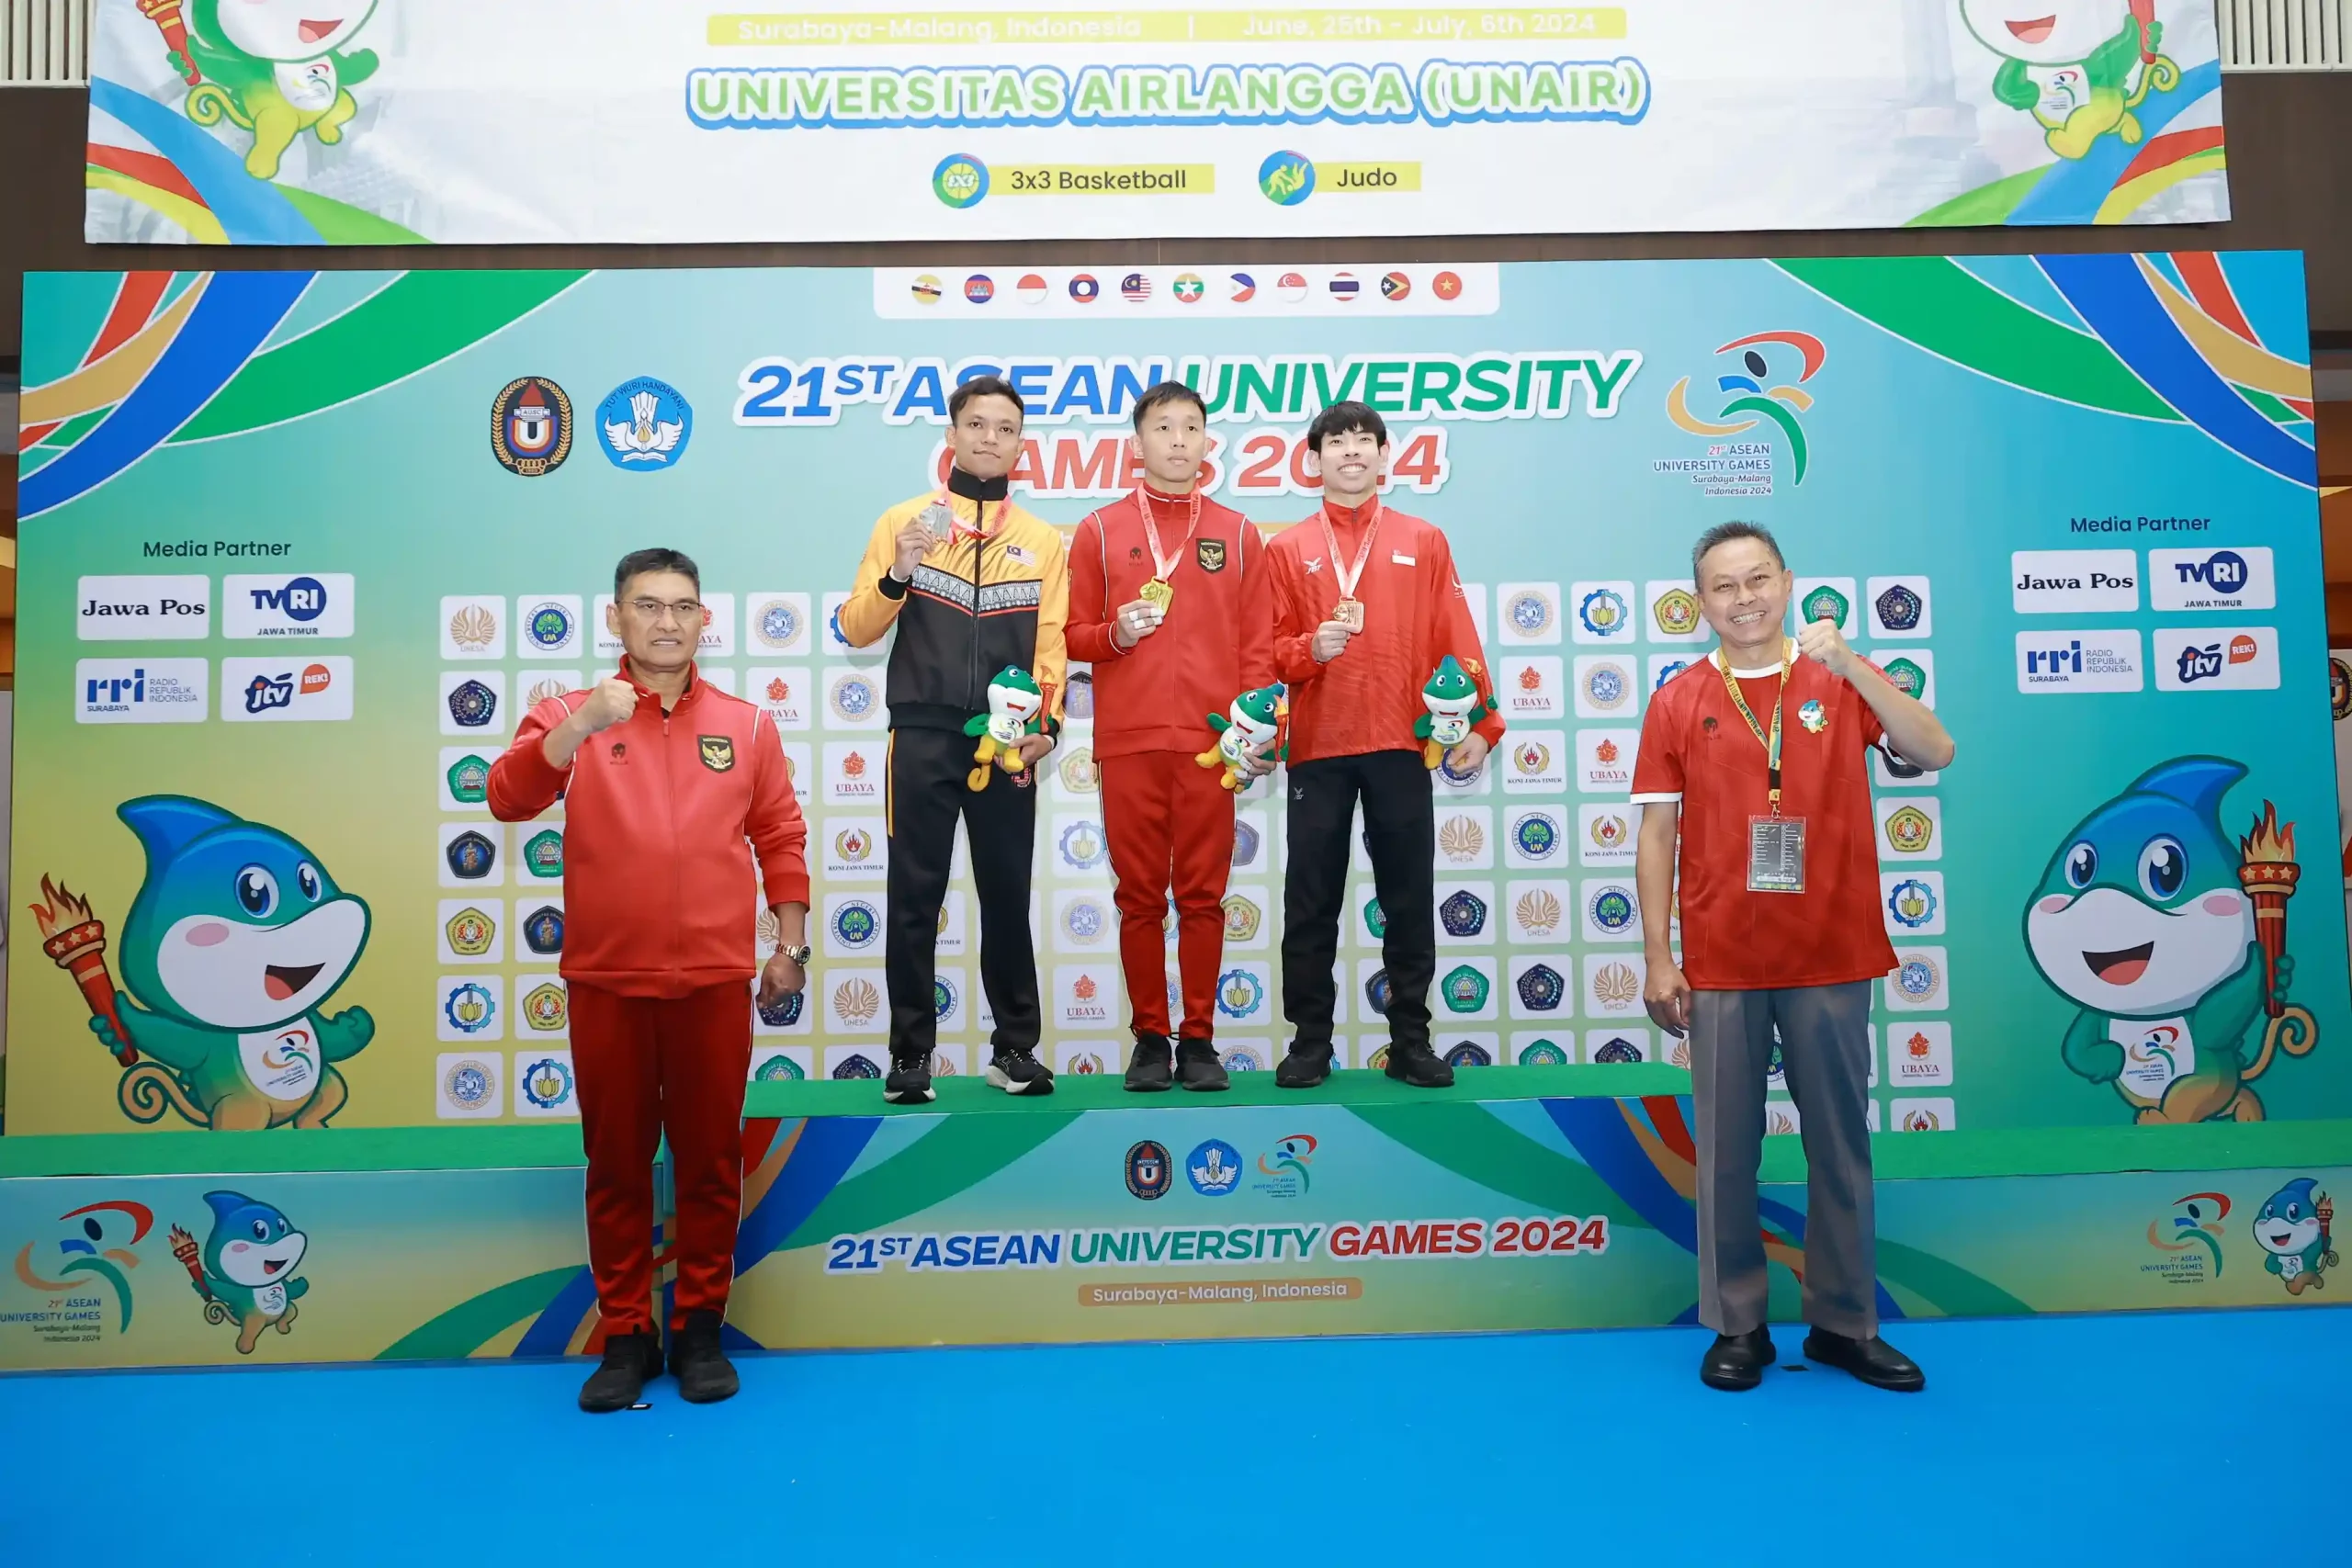 Highlights of ASEAN University Games Judo Matches